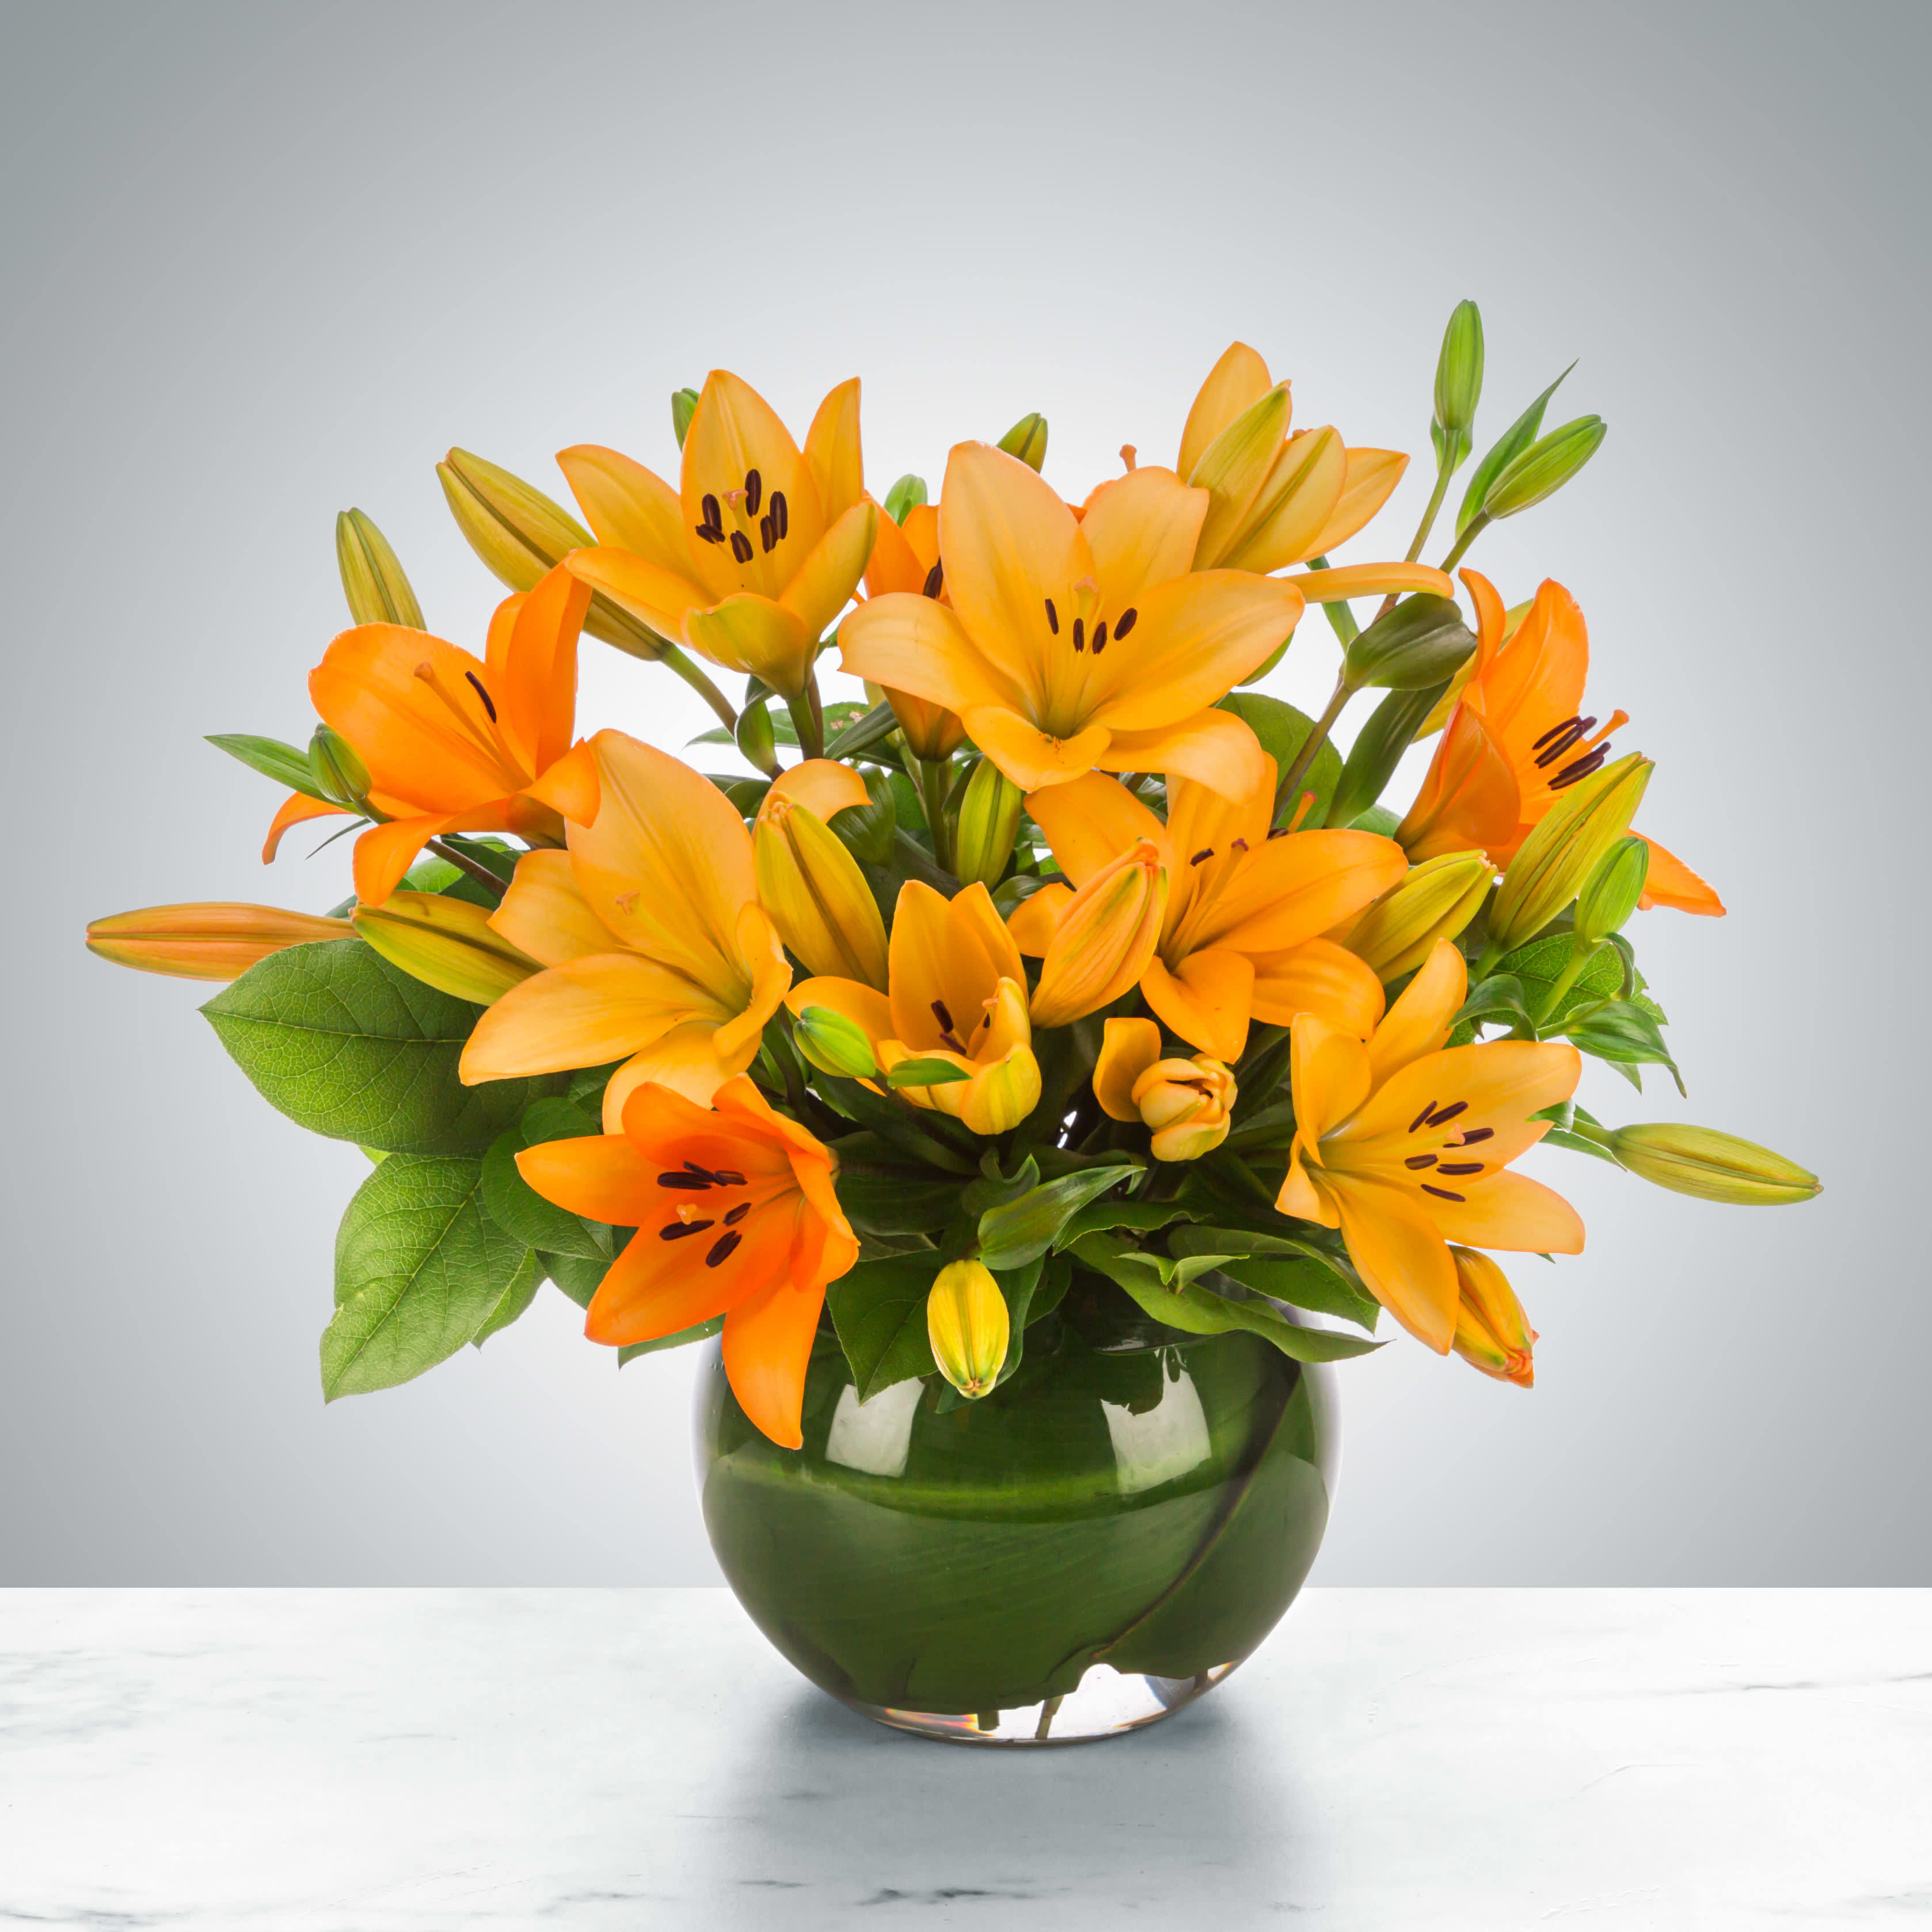 Lily Love by BloomNation™ - Orange lilies are a great gift to send for celebrating Grandparents Day, Parents Day, or a birthday as they symbolize confidence, energy, and honor. Send a joyful bowl of orange lilies to brighten a space.  1st Image: Standard 2nd Image: Premium